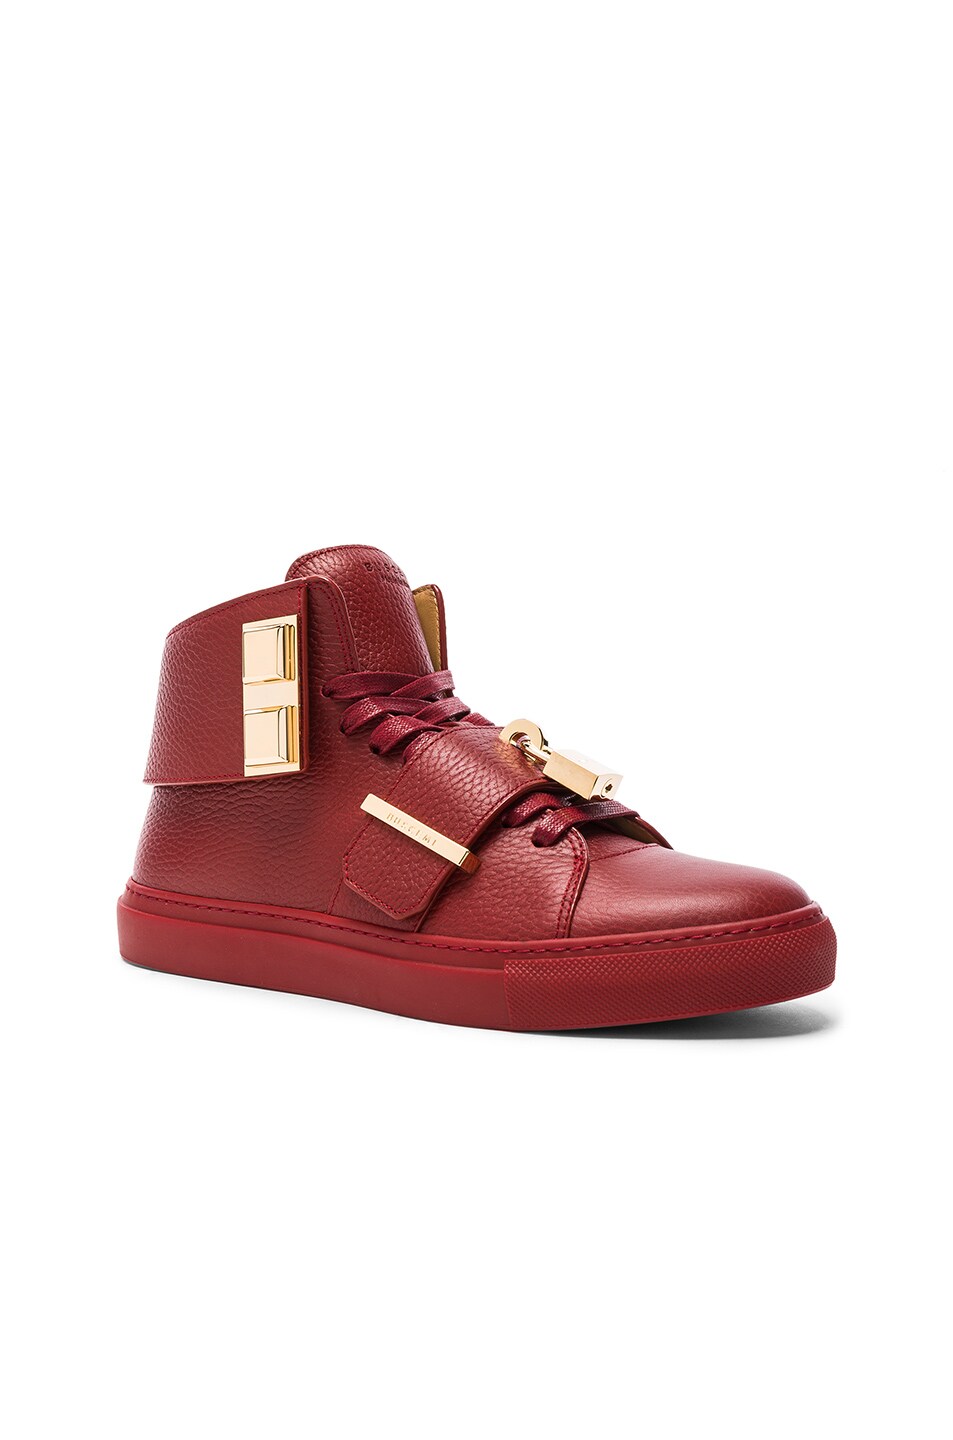 Image 1 of Buscemi Pebbled Leather Trap Sneakers in Scarlet Red